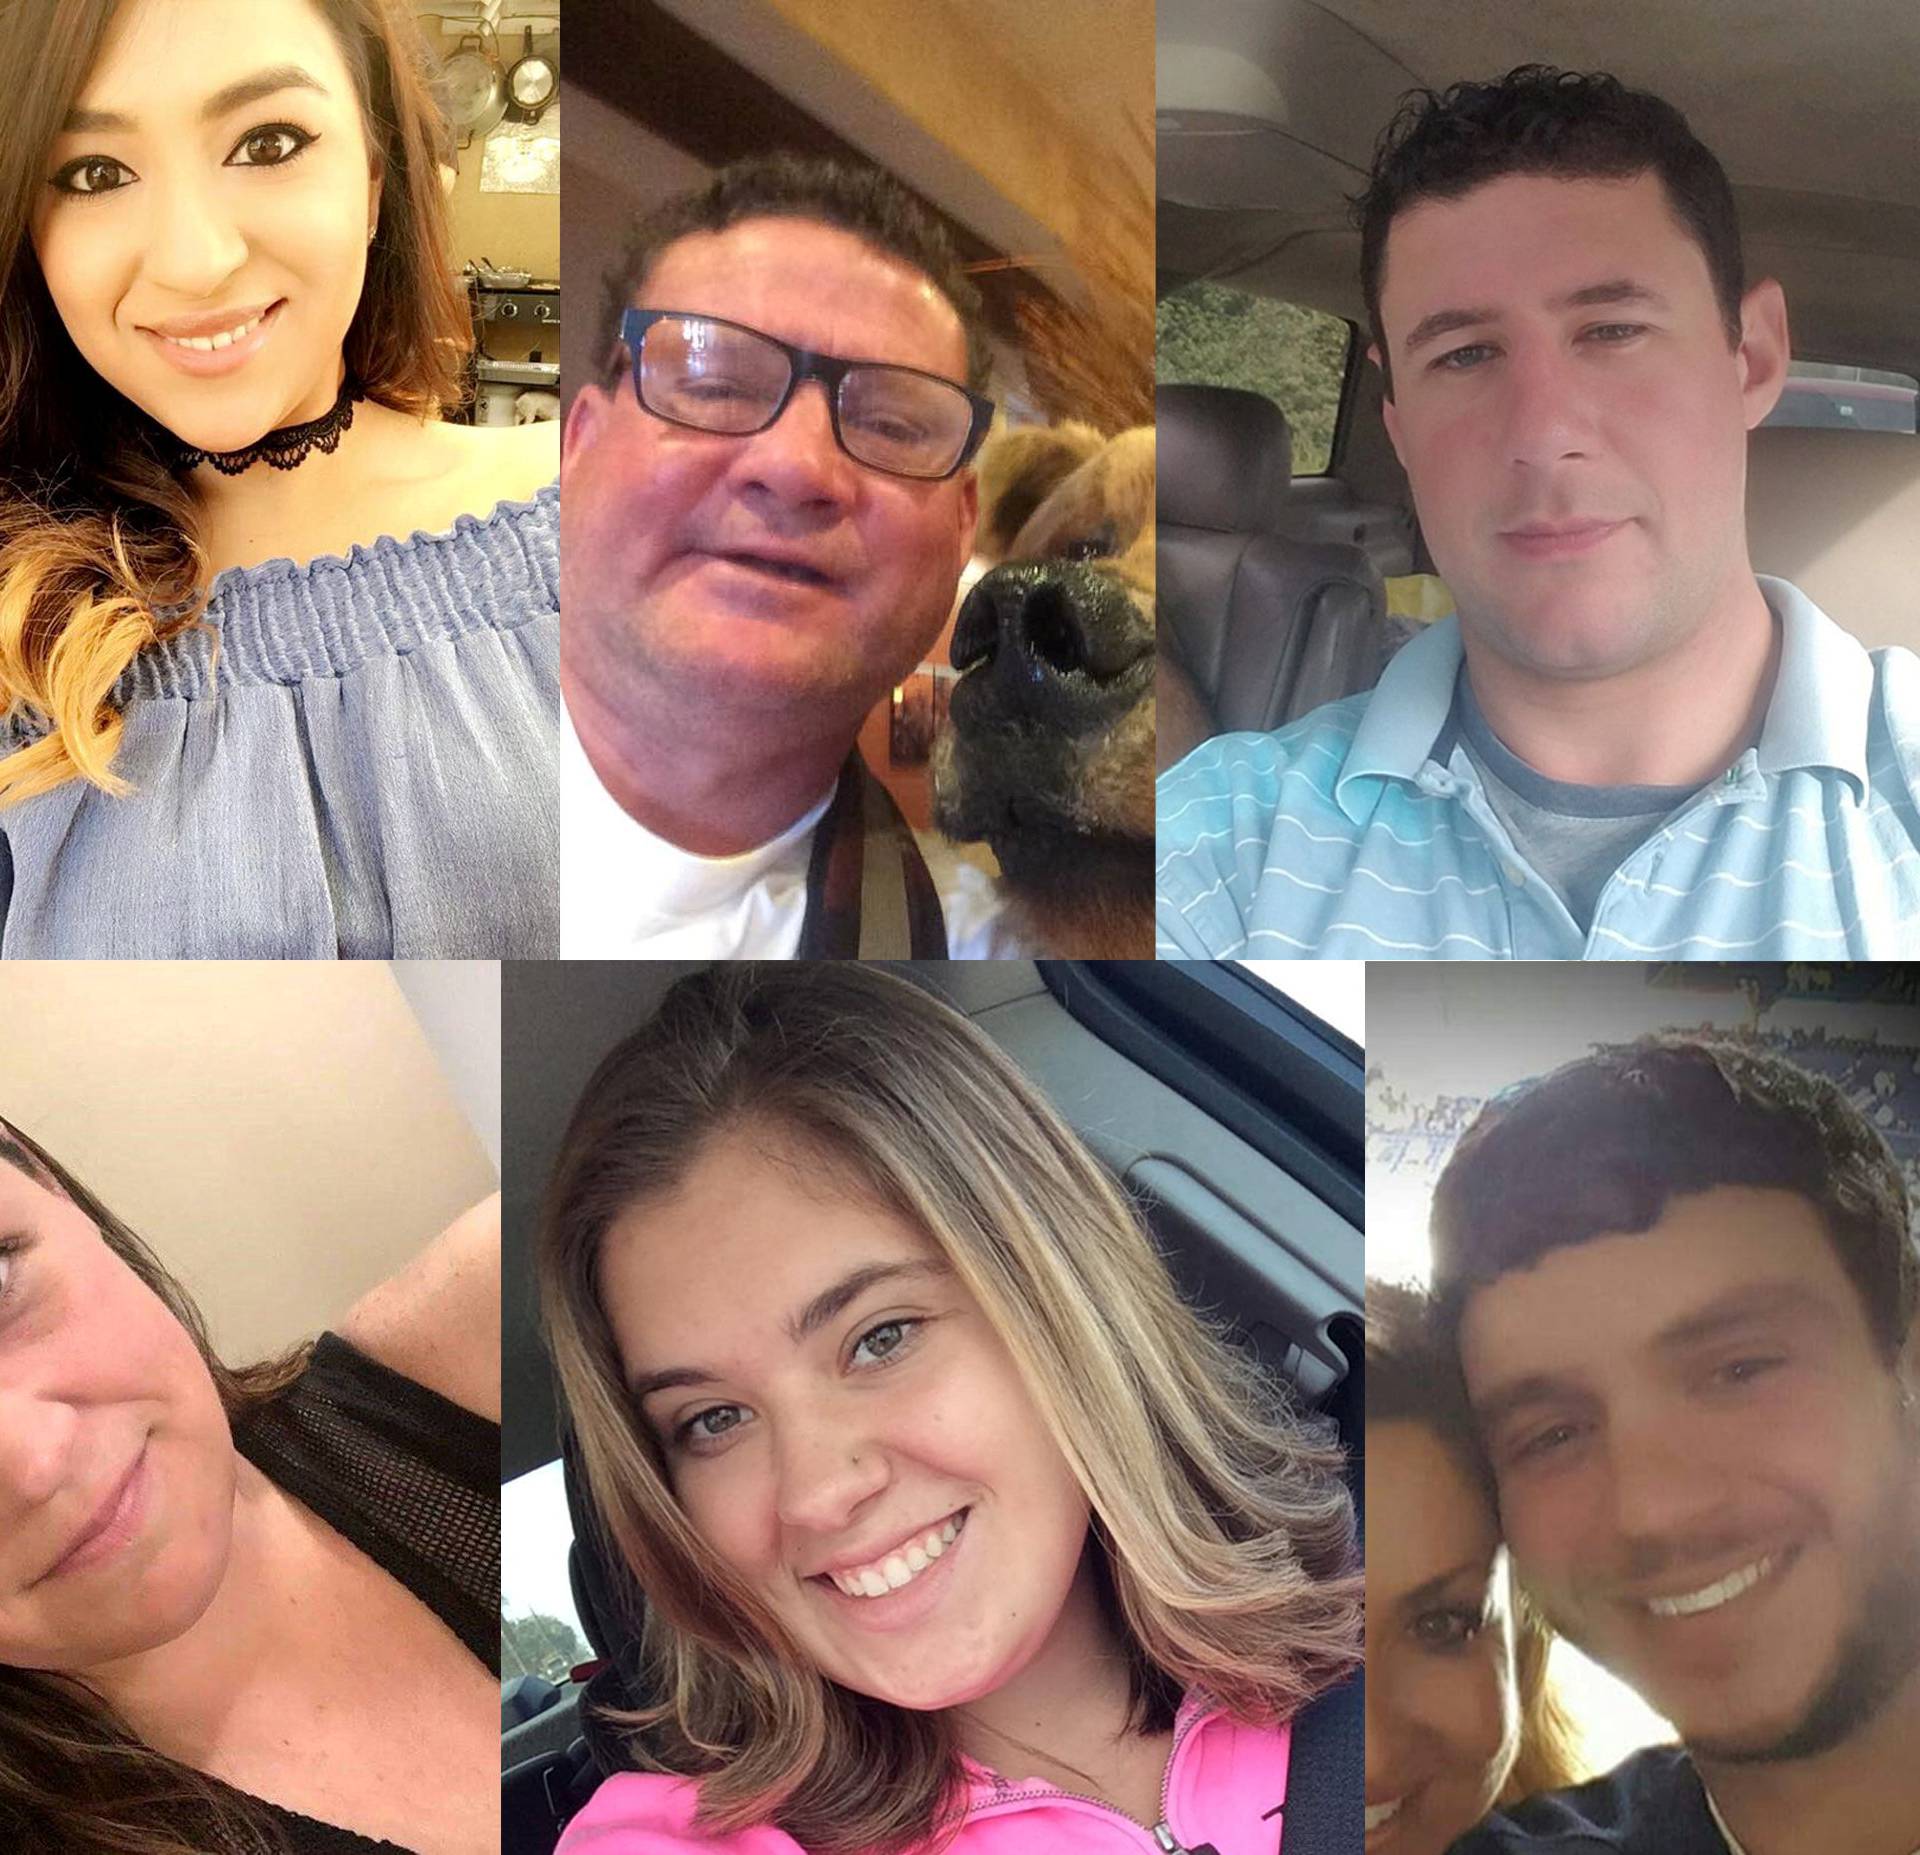 A combination photo of victims of the October 1, 2017 mass shooting at the Mandalay Bay in Las Vegas